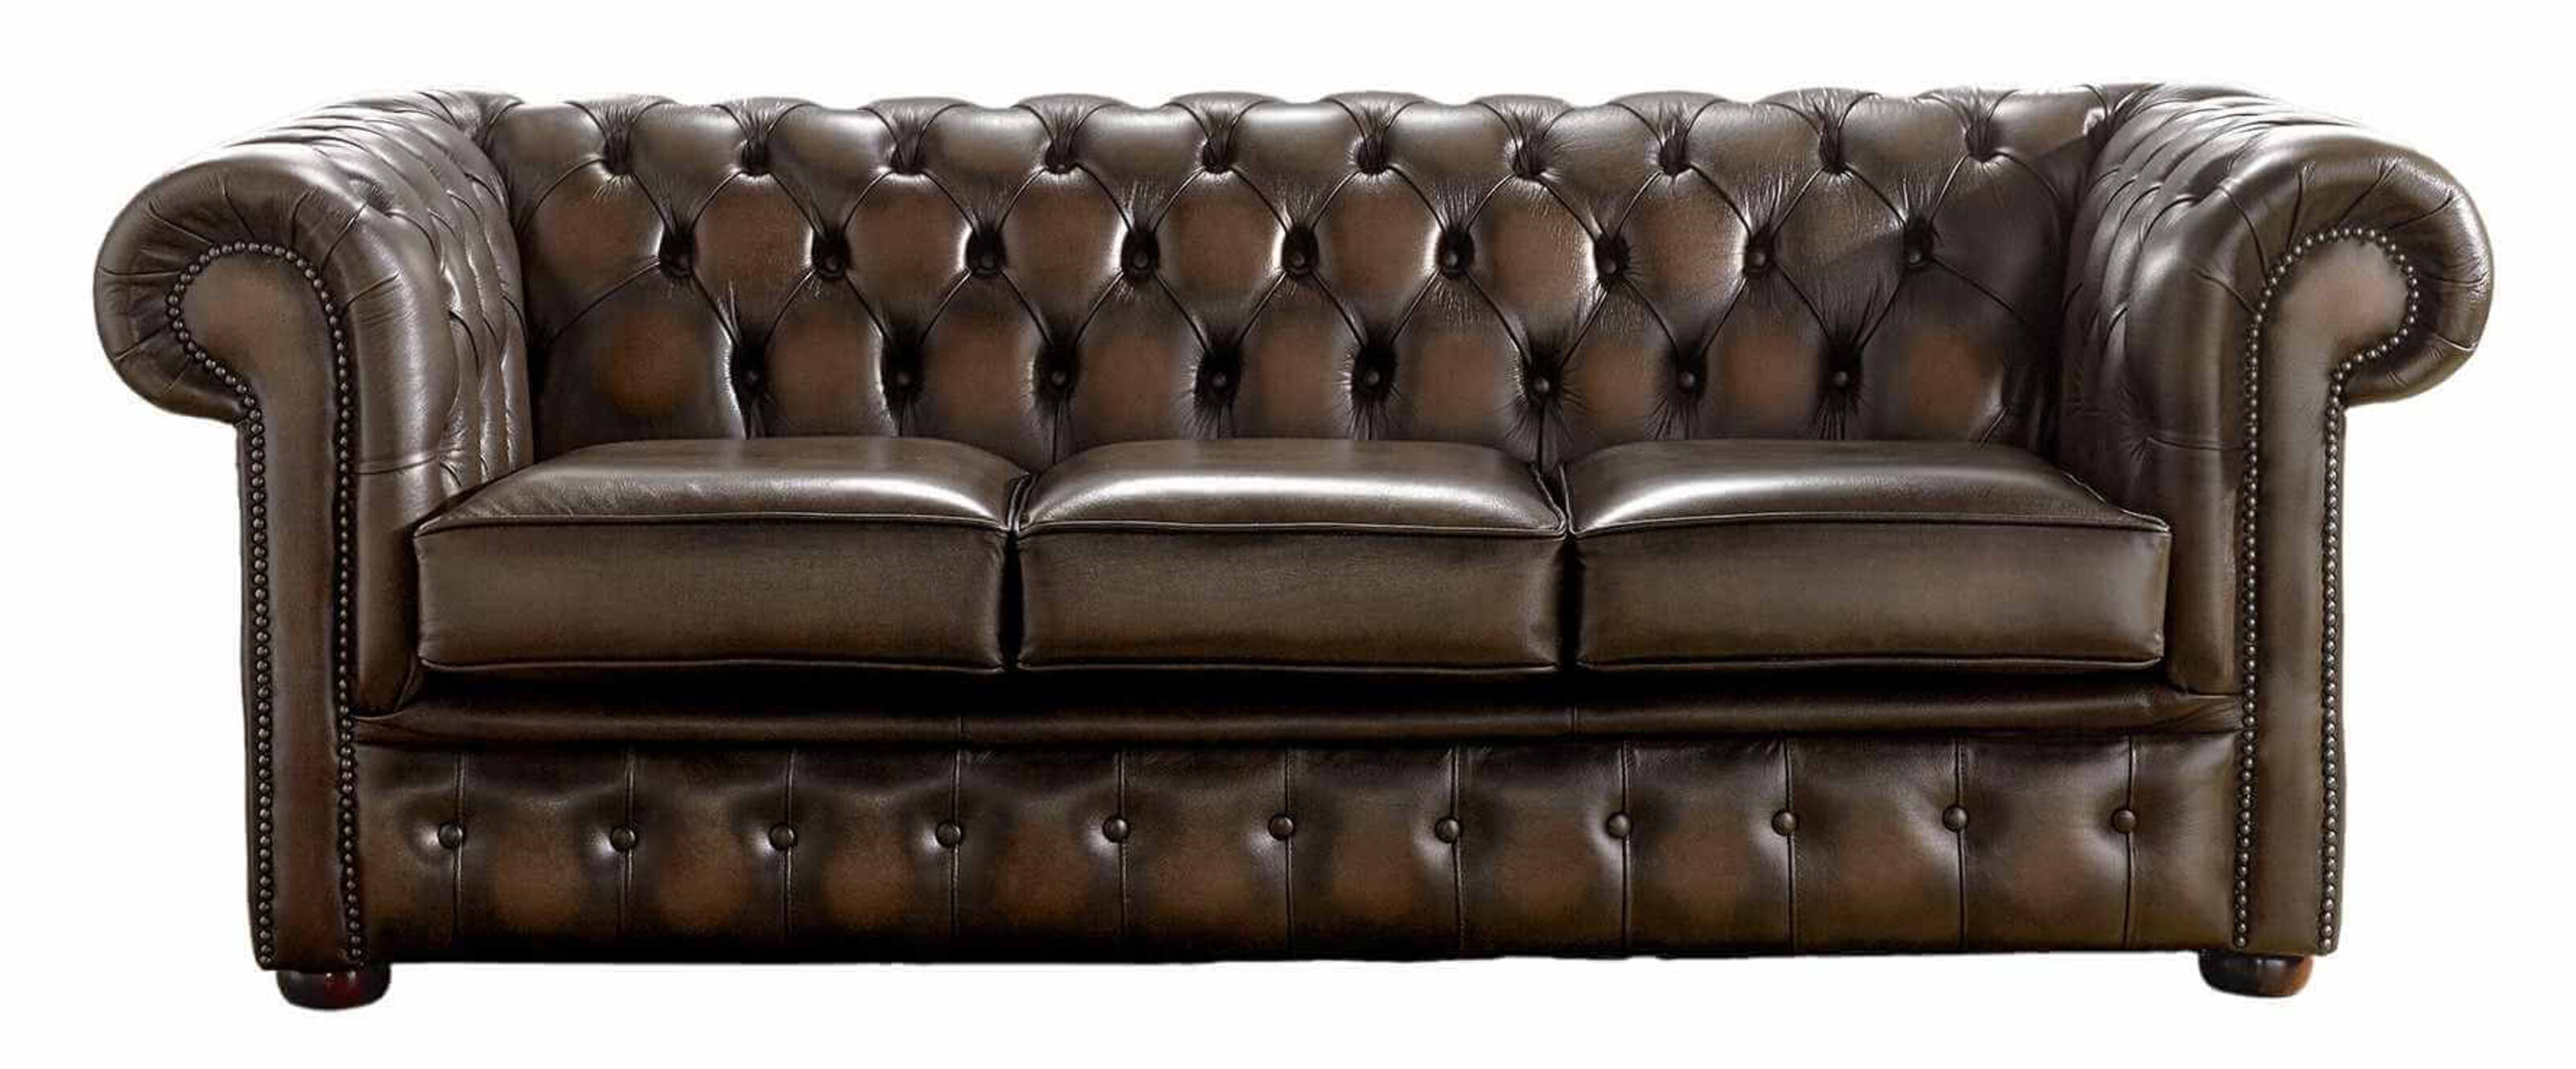 Timeless Elegance or Old-Fashioned Charm? Reassessing the Chesterfield Sofa  %Post Title